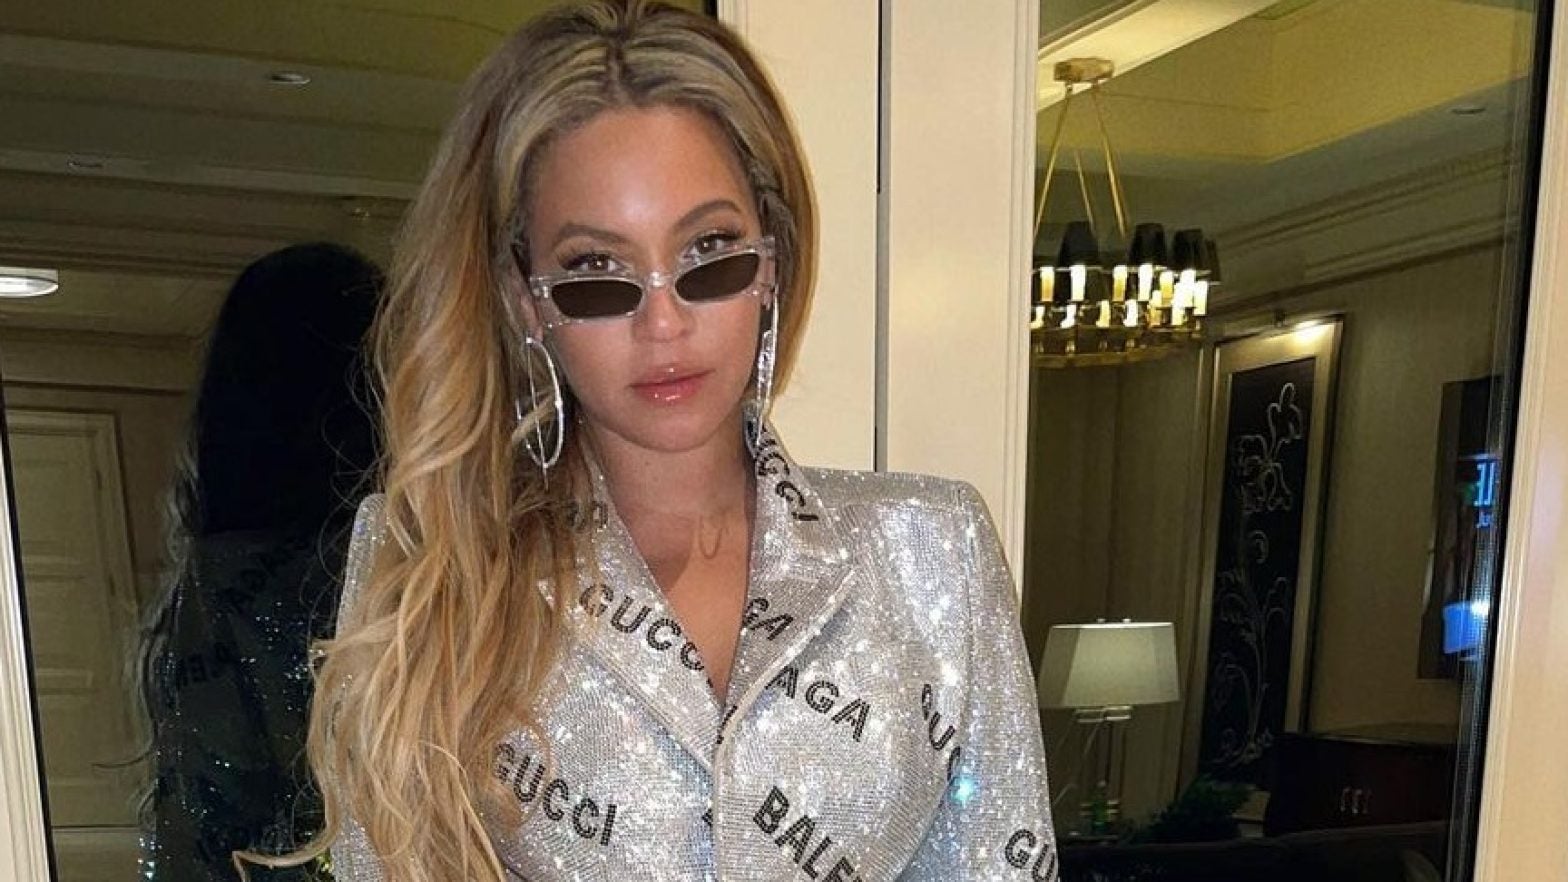 Beyoncé Shined Bright In This Sparkly Silver Suit